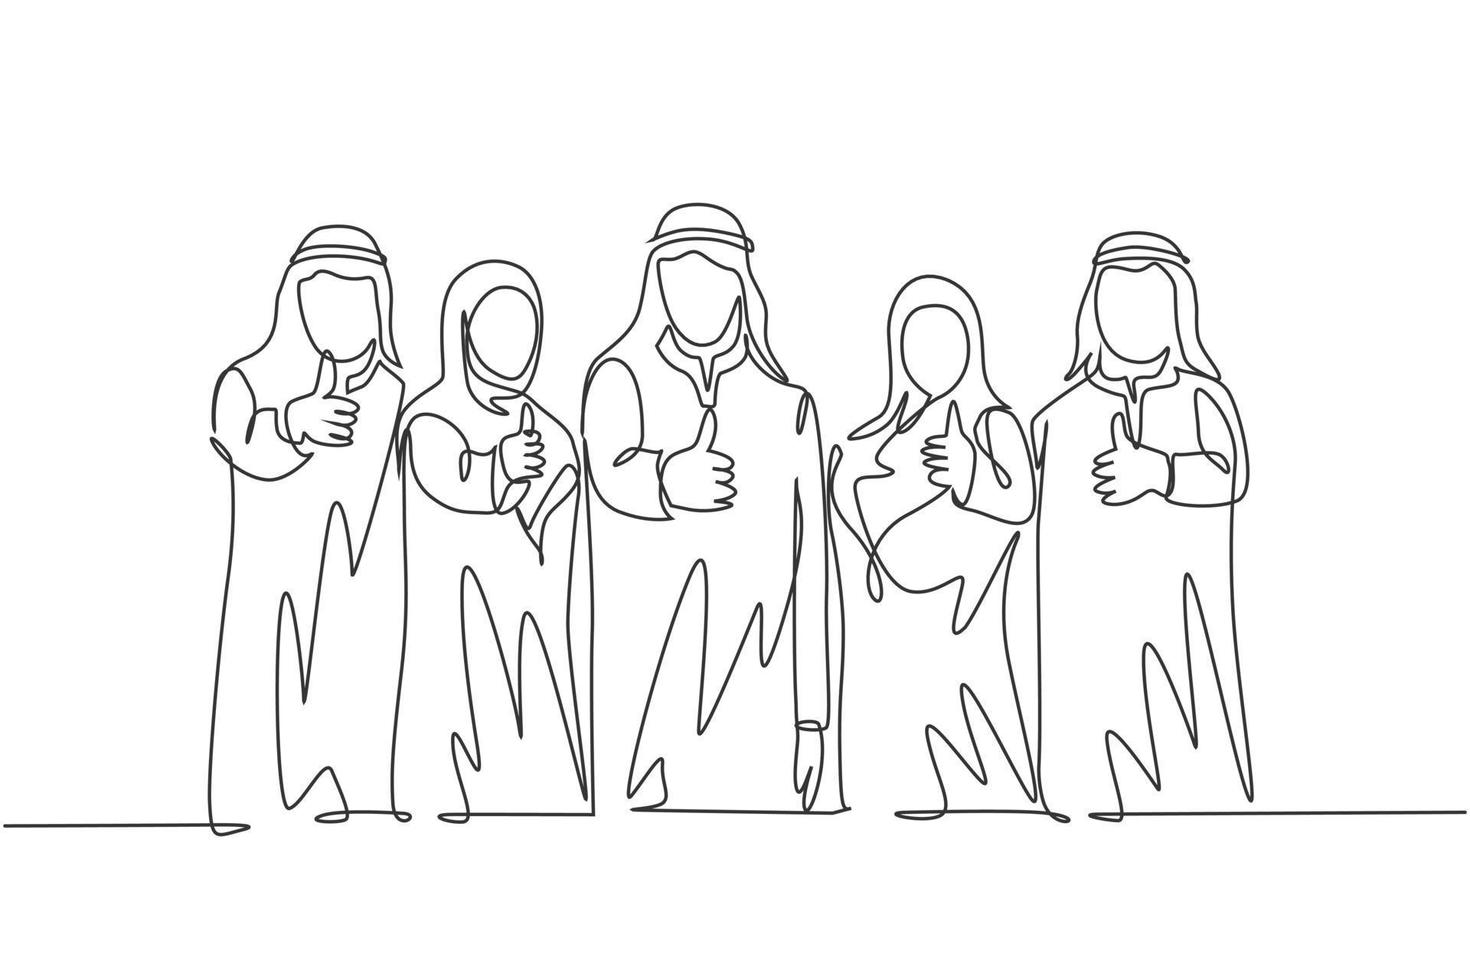 One continuous line drawing of young muslim male and female managers giving thumbs up gestures. Islamic clothing shemag, kandura, scarf, keffiyeh. Single line draw design vector illustration